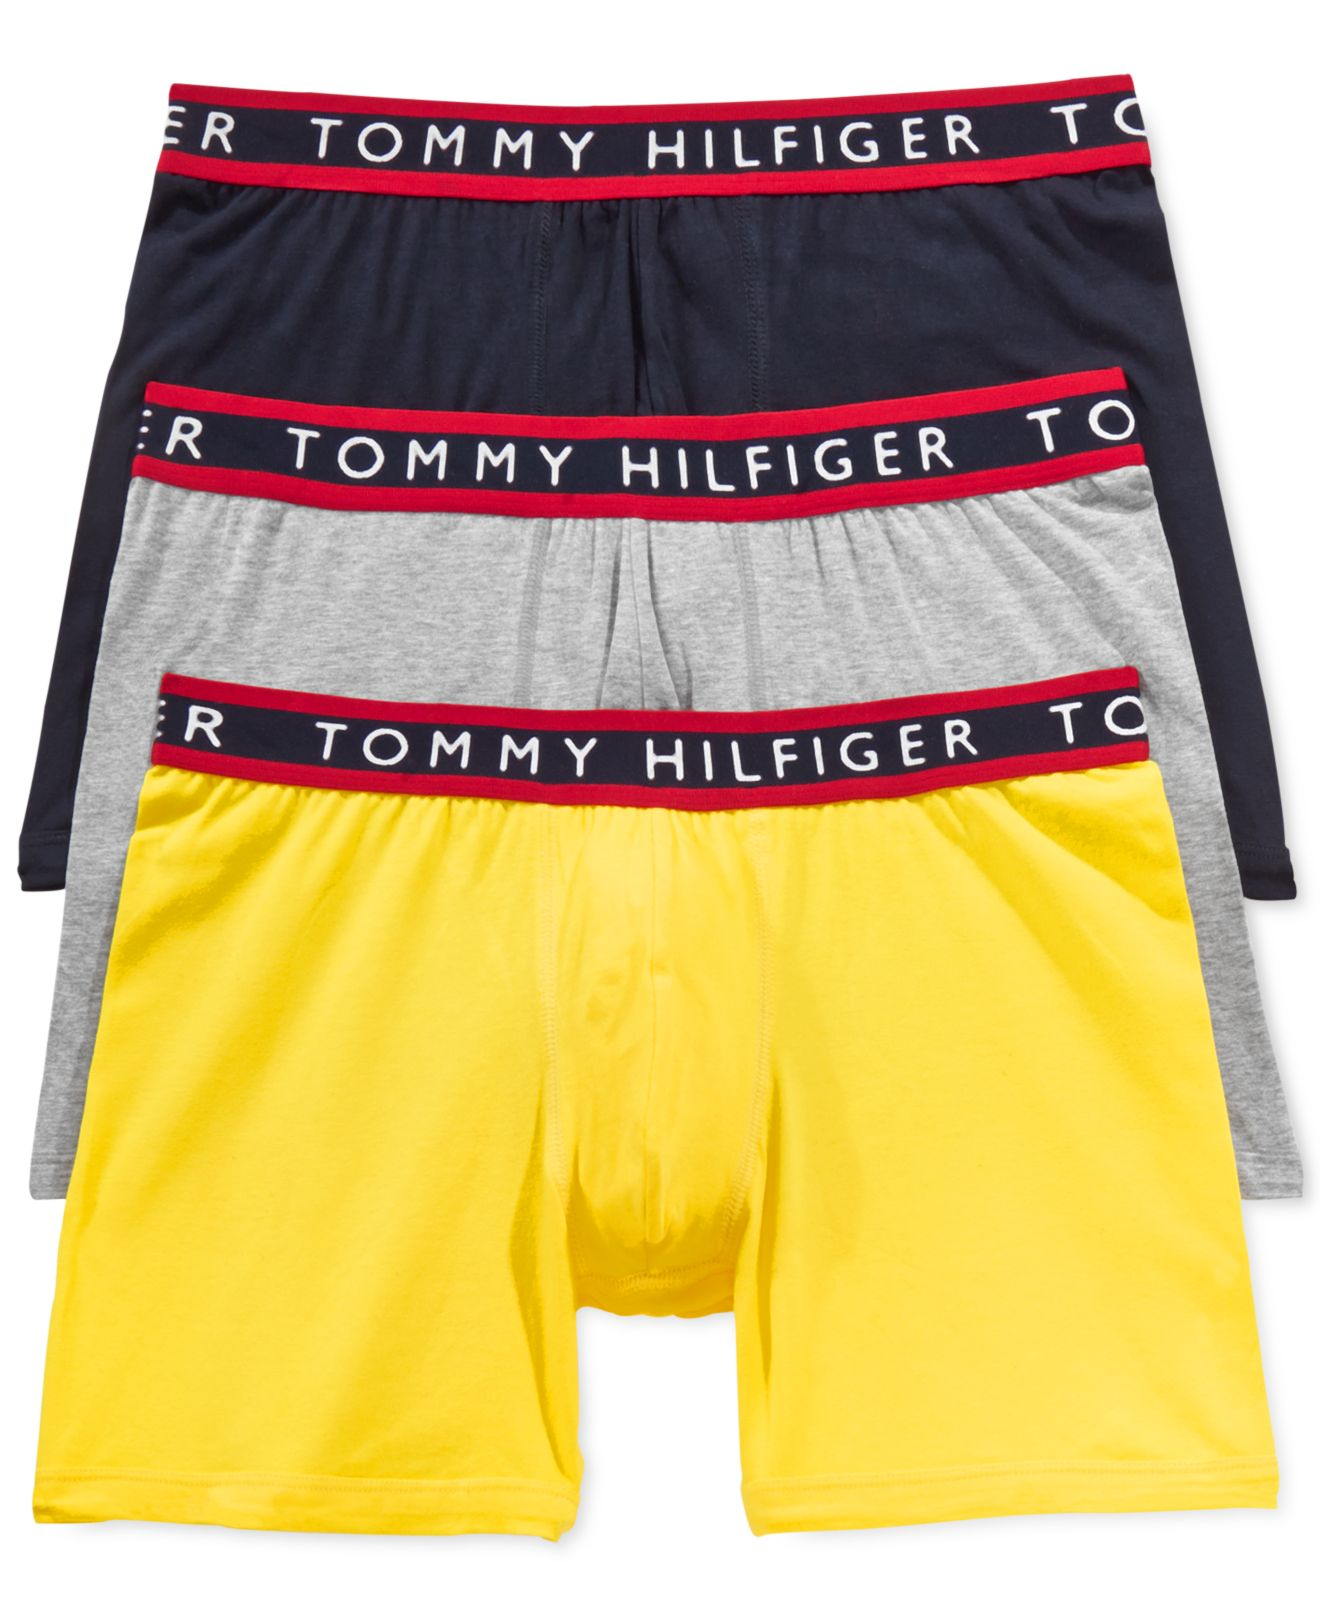 tommy hilfiger yellow boxers